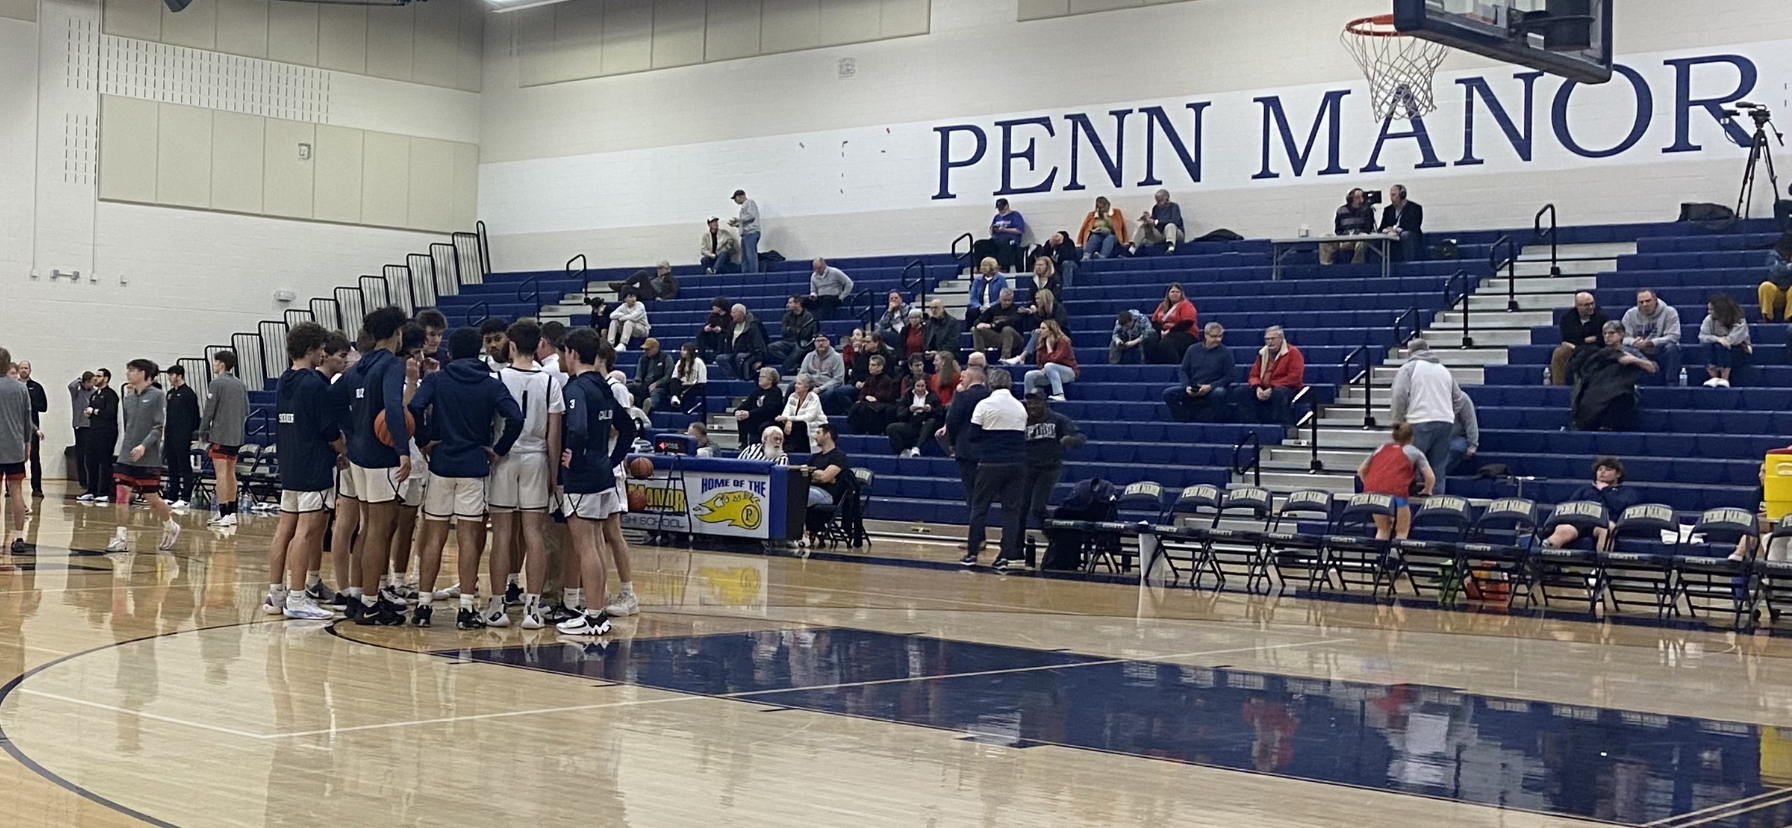 Penn Manor sweeps “doubleheader”, clinches league and district tournament berths